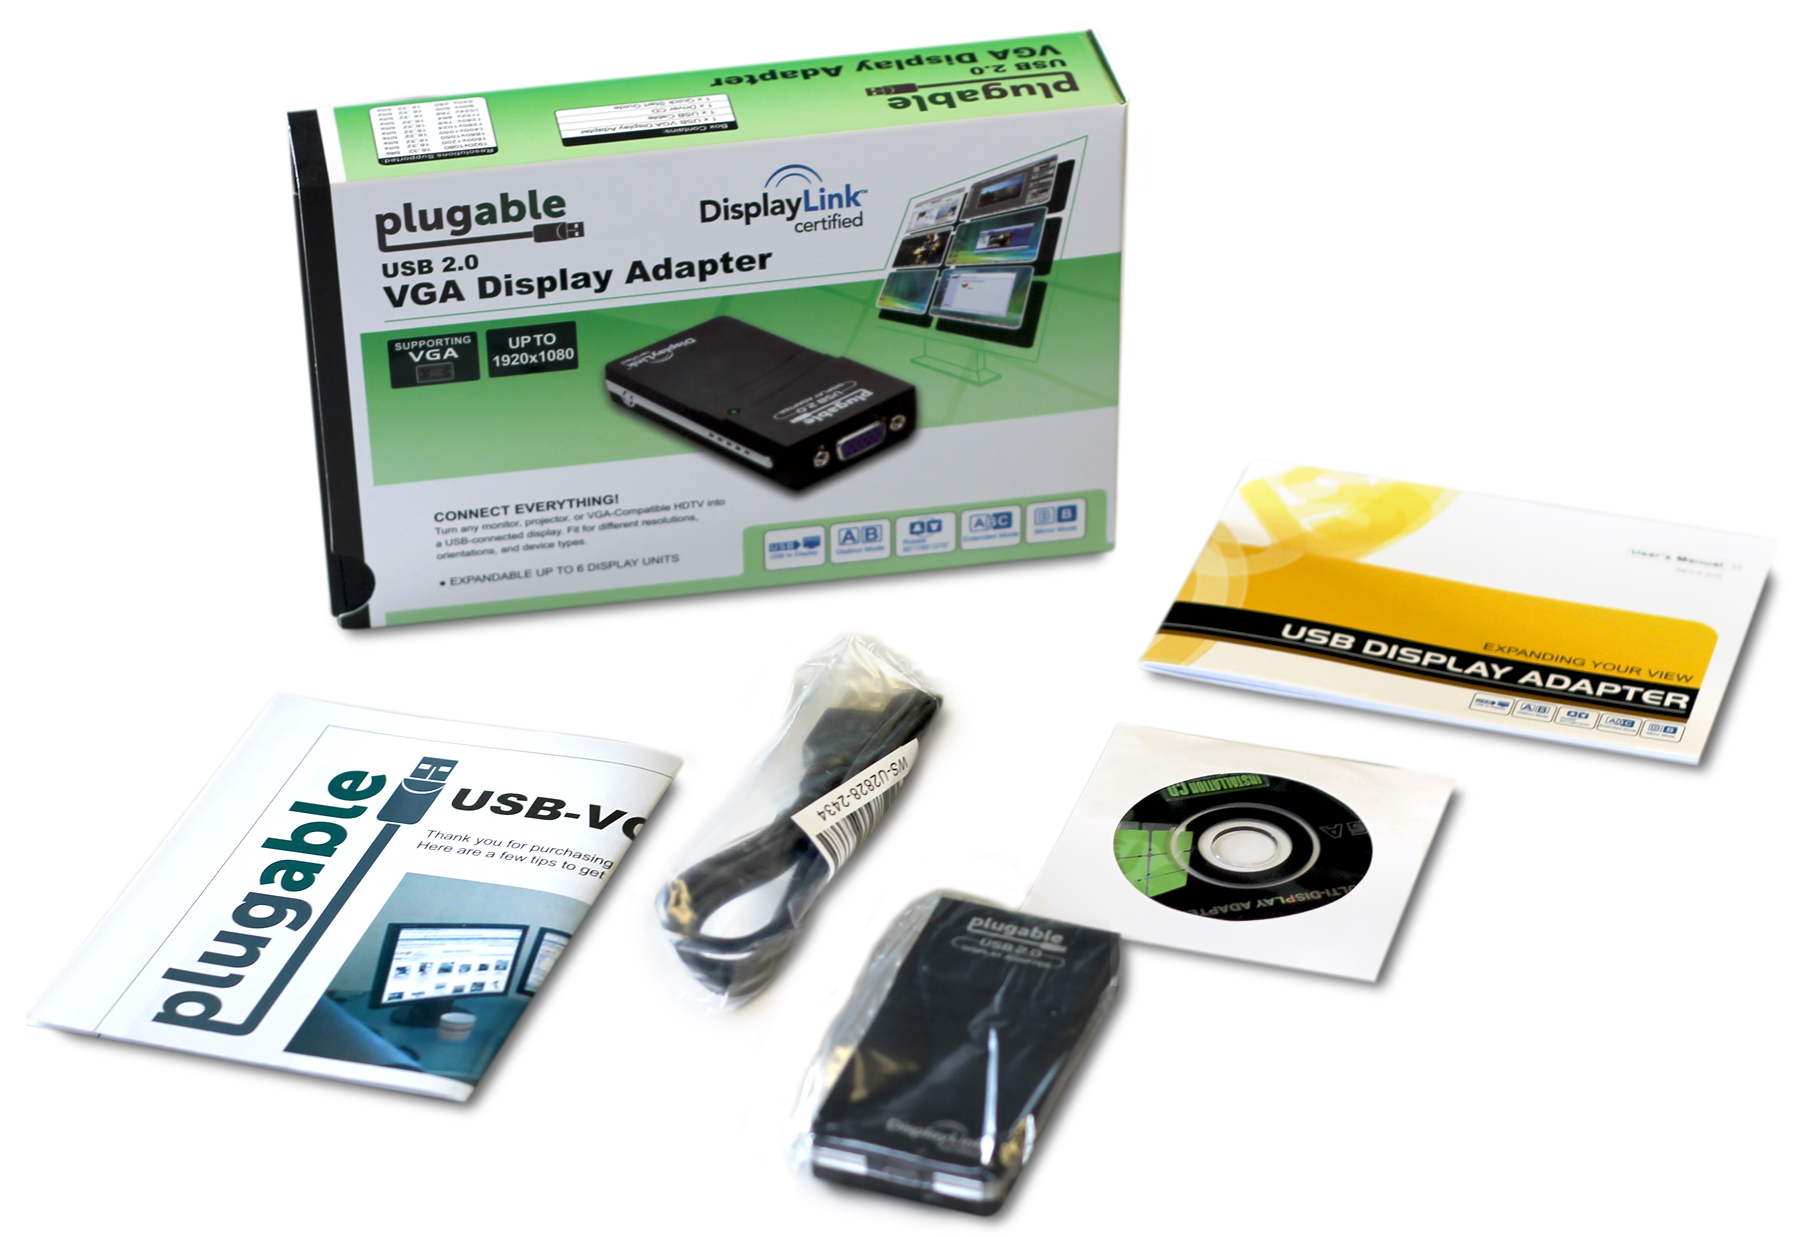 Plugable USB 2.0 to VGA Video Graphics Adapter for Multiple Monitors up to 1920x1080 Supports Windows 10, 8.1, 7, XP, and Mac - image 3 of 3